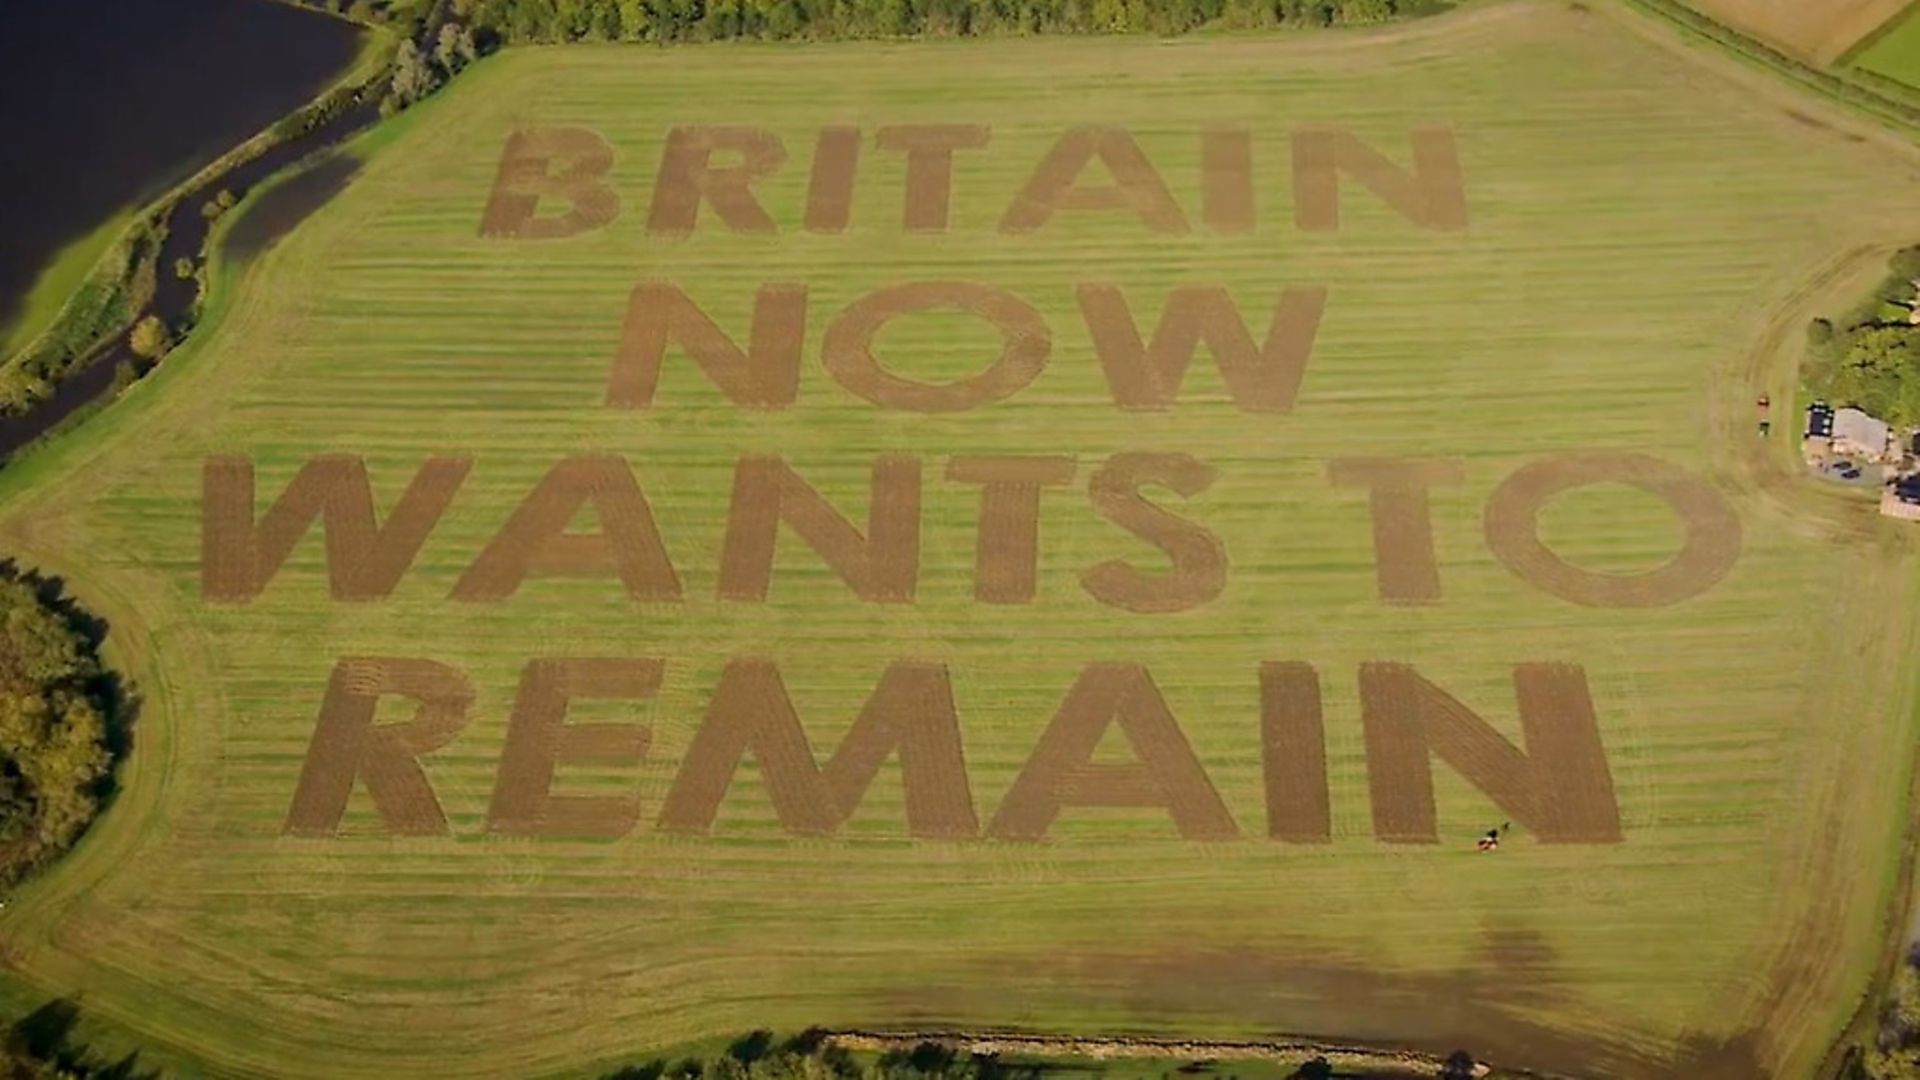 "Britain now wants to remain" is the giant message ploughed into a field in Wiltshite by campaigners Led By Donkeys. Picture: Led By Donkeys - Credit: Led By Donkeys